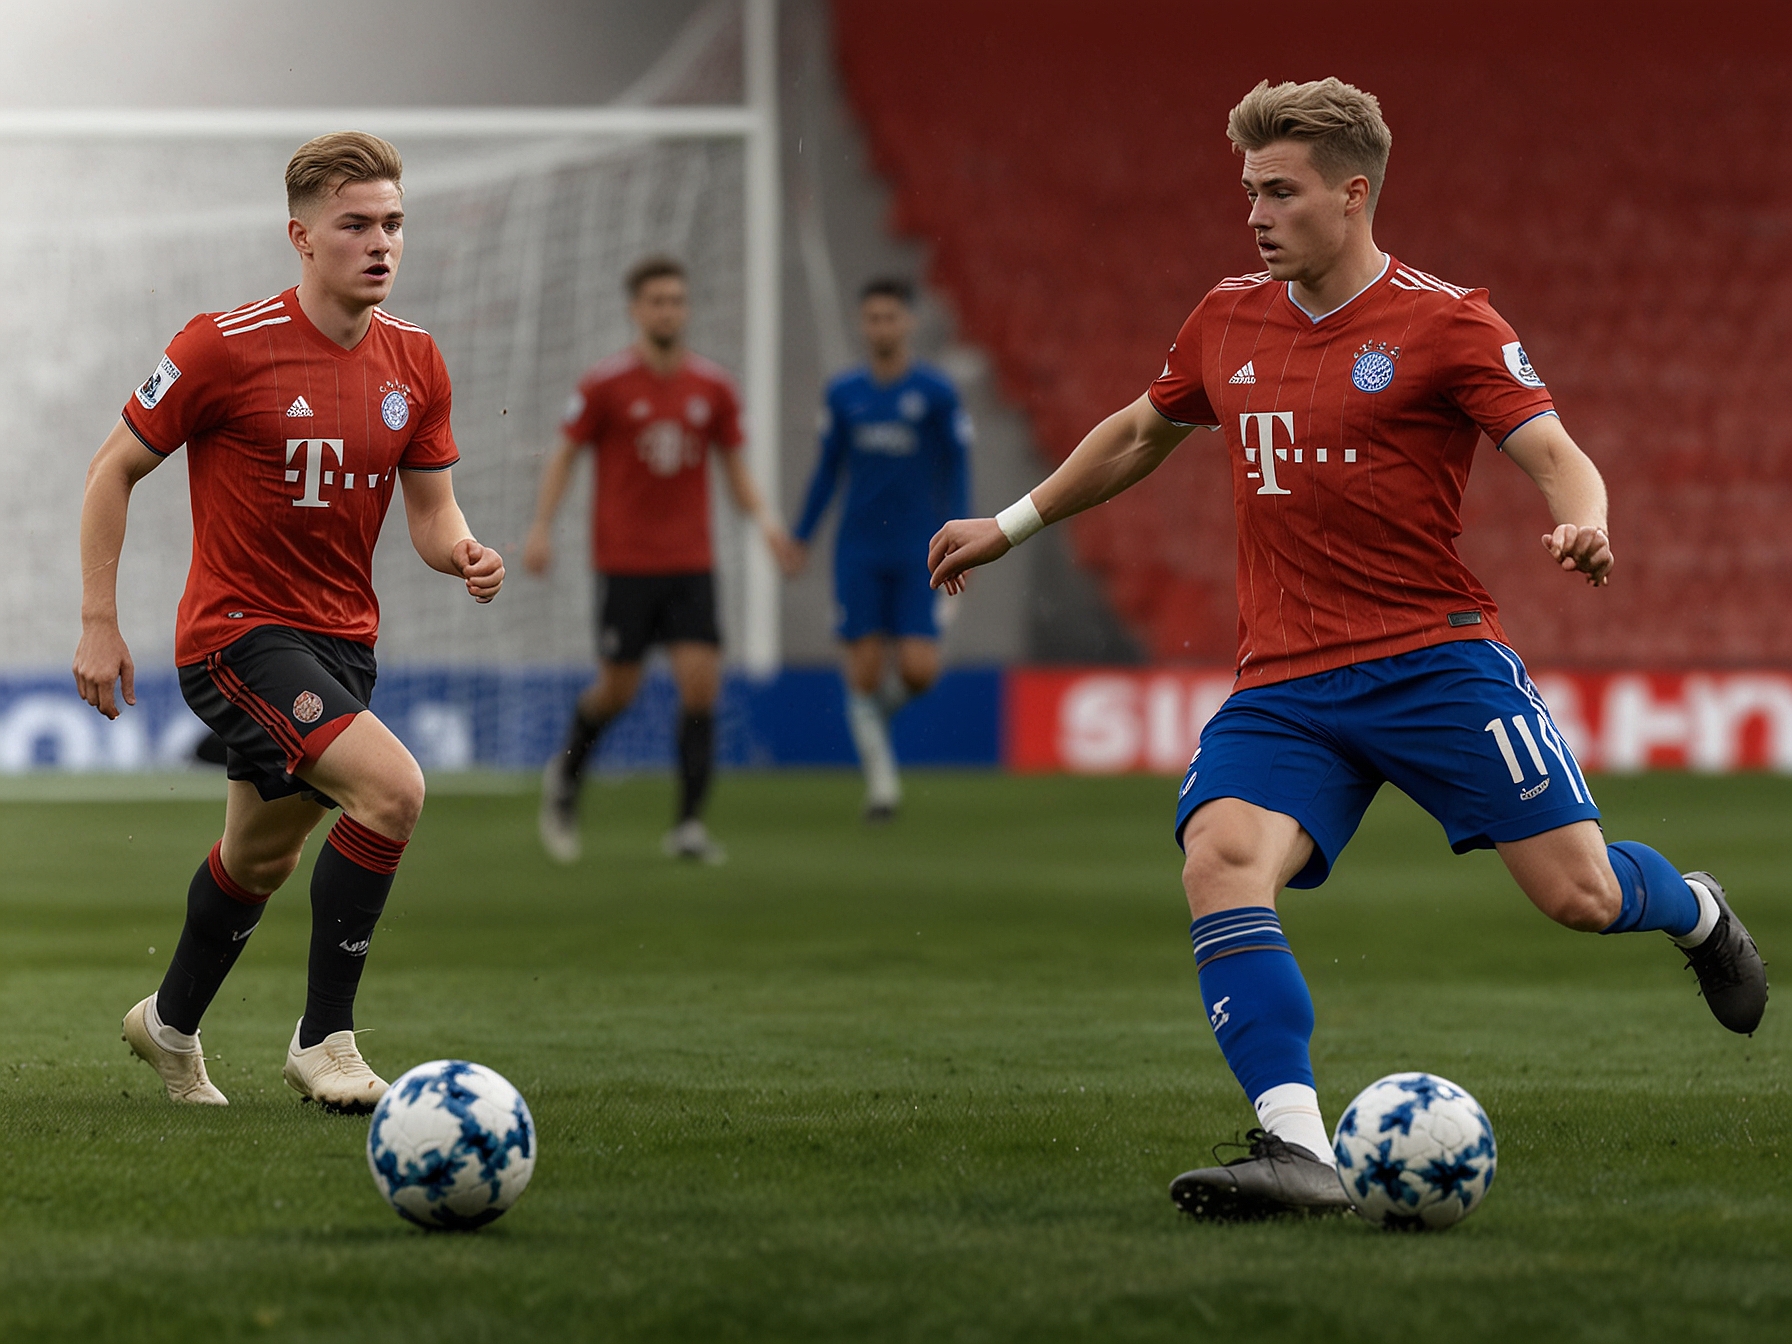 A split image showcasing Matthijs de Ligt in his Bayern Munich kit and Jarrad Branthwaite playing for Everton, highlighting Manchester United's interest in these two defenders during the transfer window.